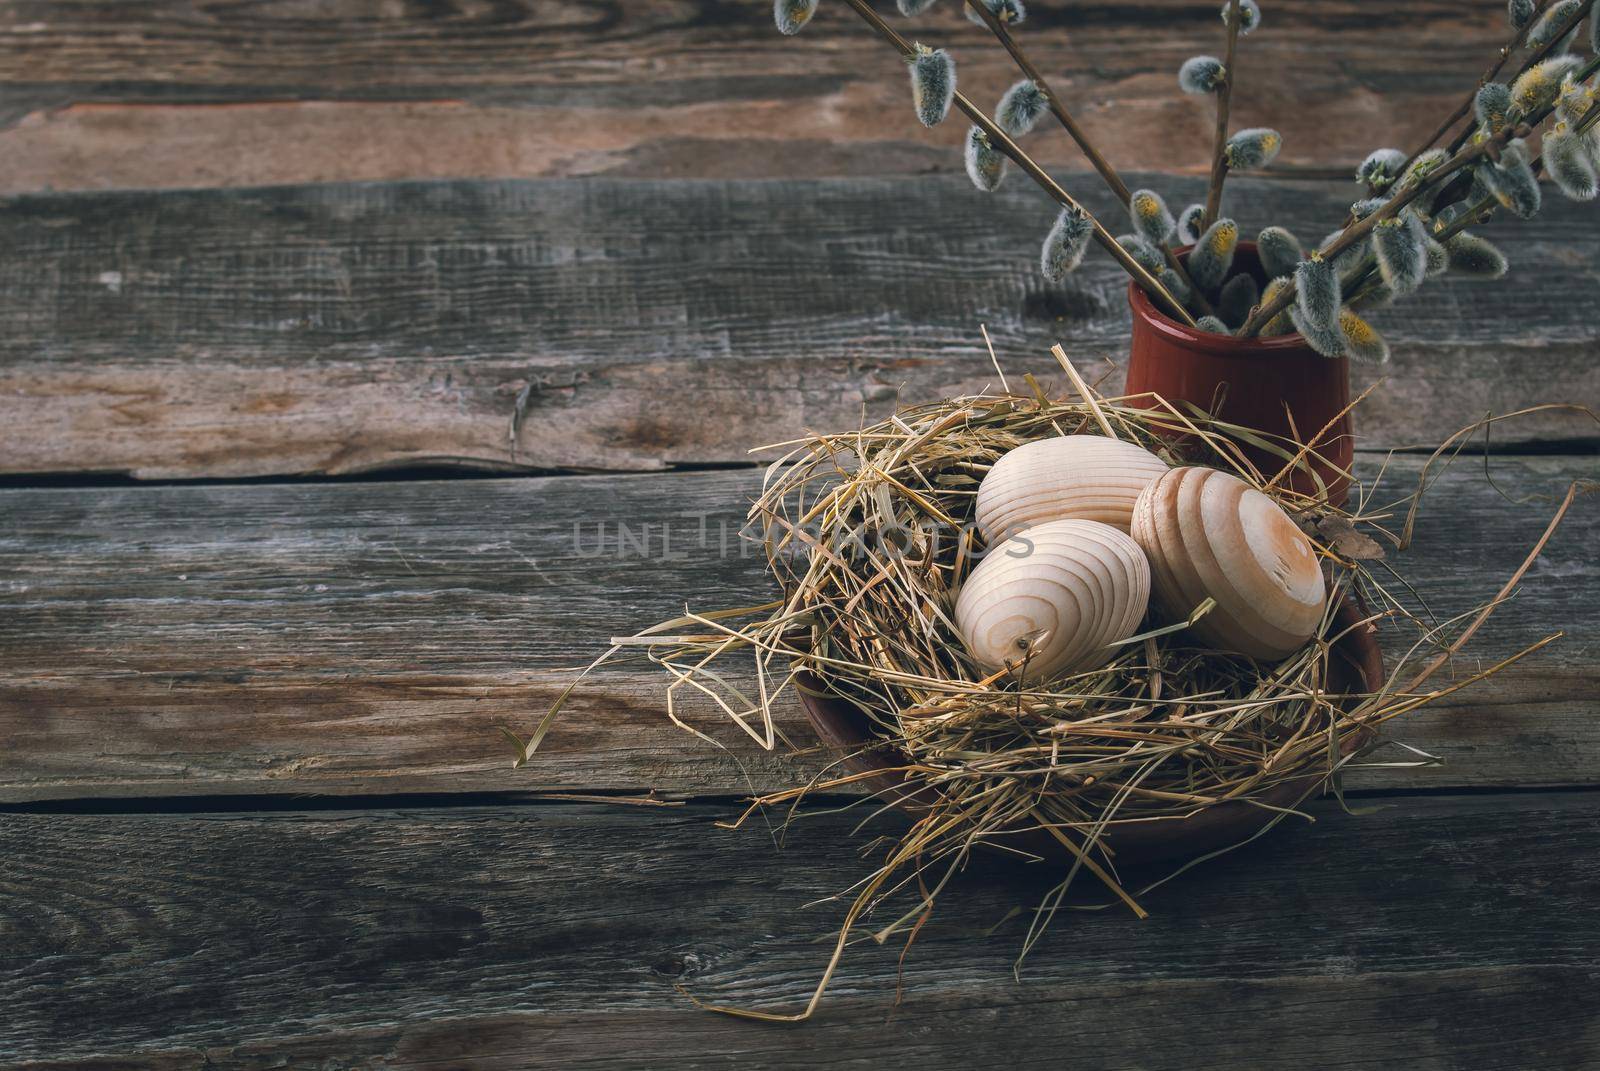 Easter decoration with wooden eggs in bascket and straw on wooden background